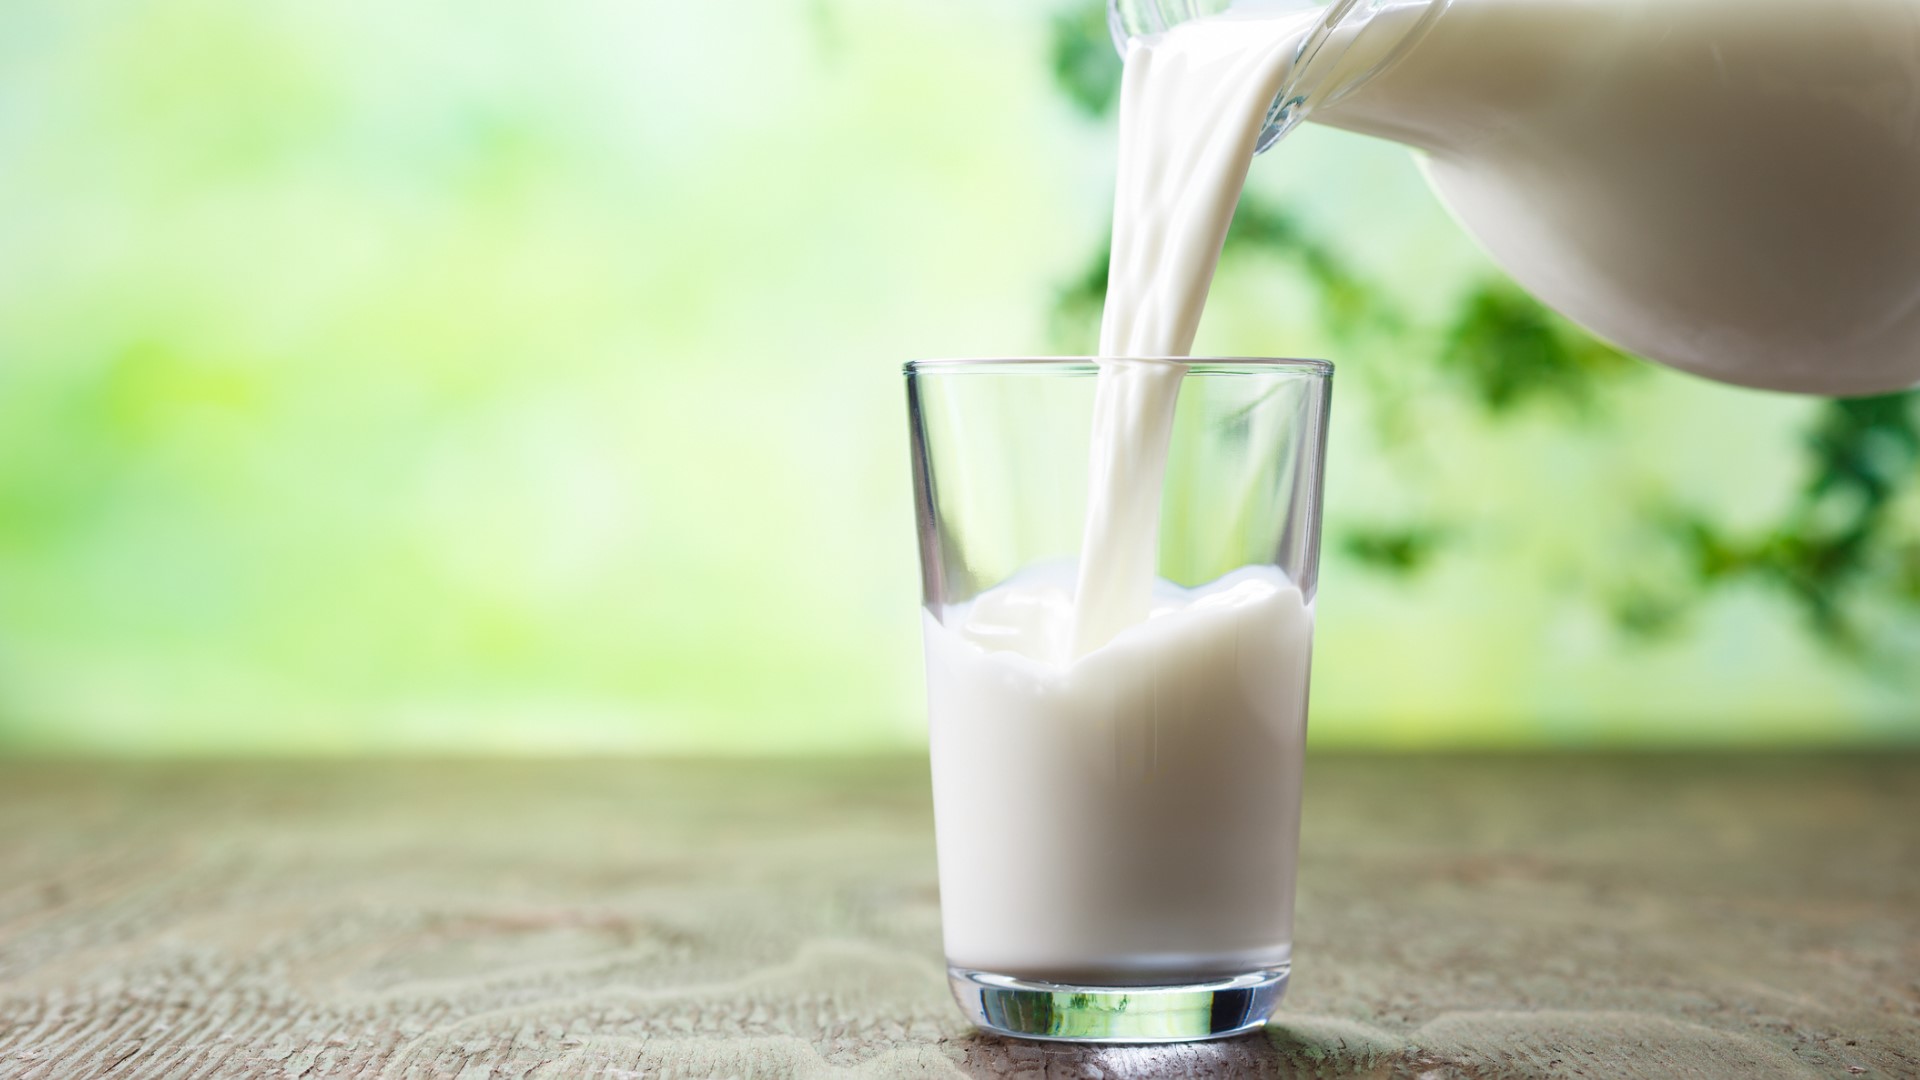 Barry Knight is pushing legislation that would ban makers of increasingly popular products like soy milk and almond milk from marketing their products as 'milk.'